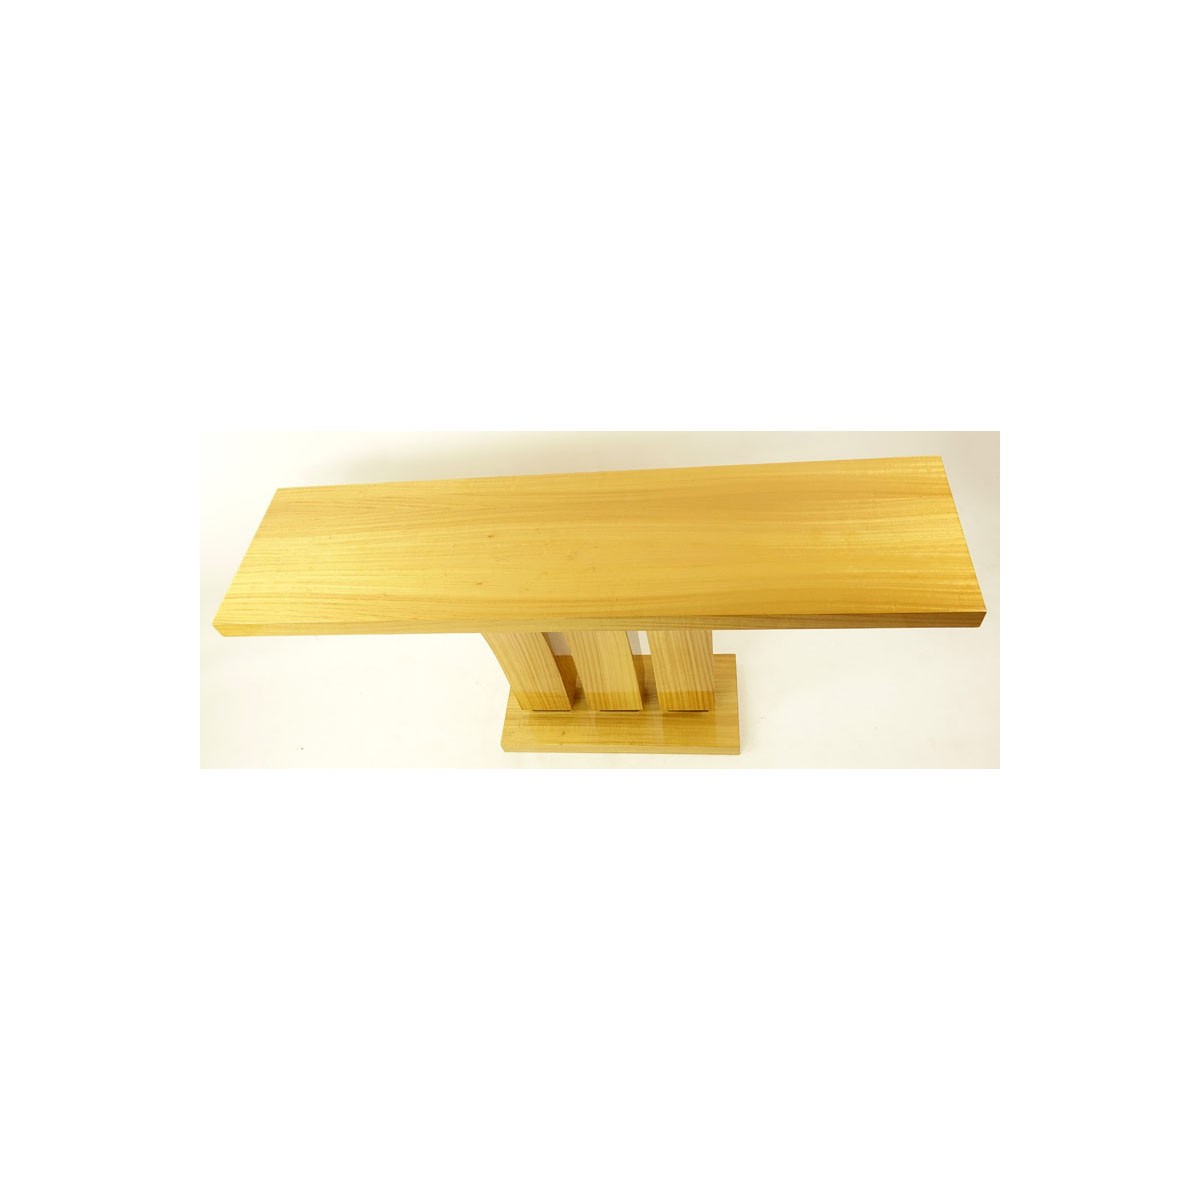 Modern Art Deco Style Satinwood Console Table